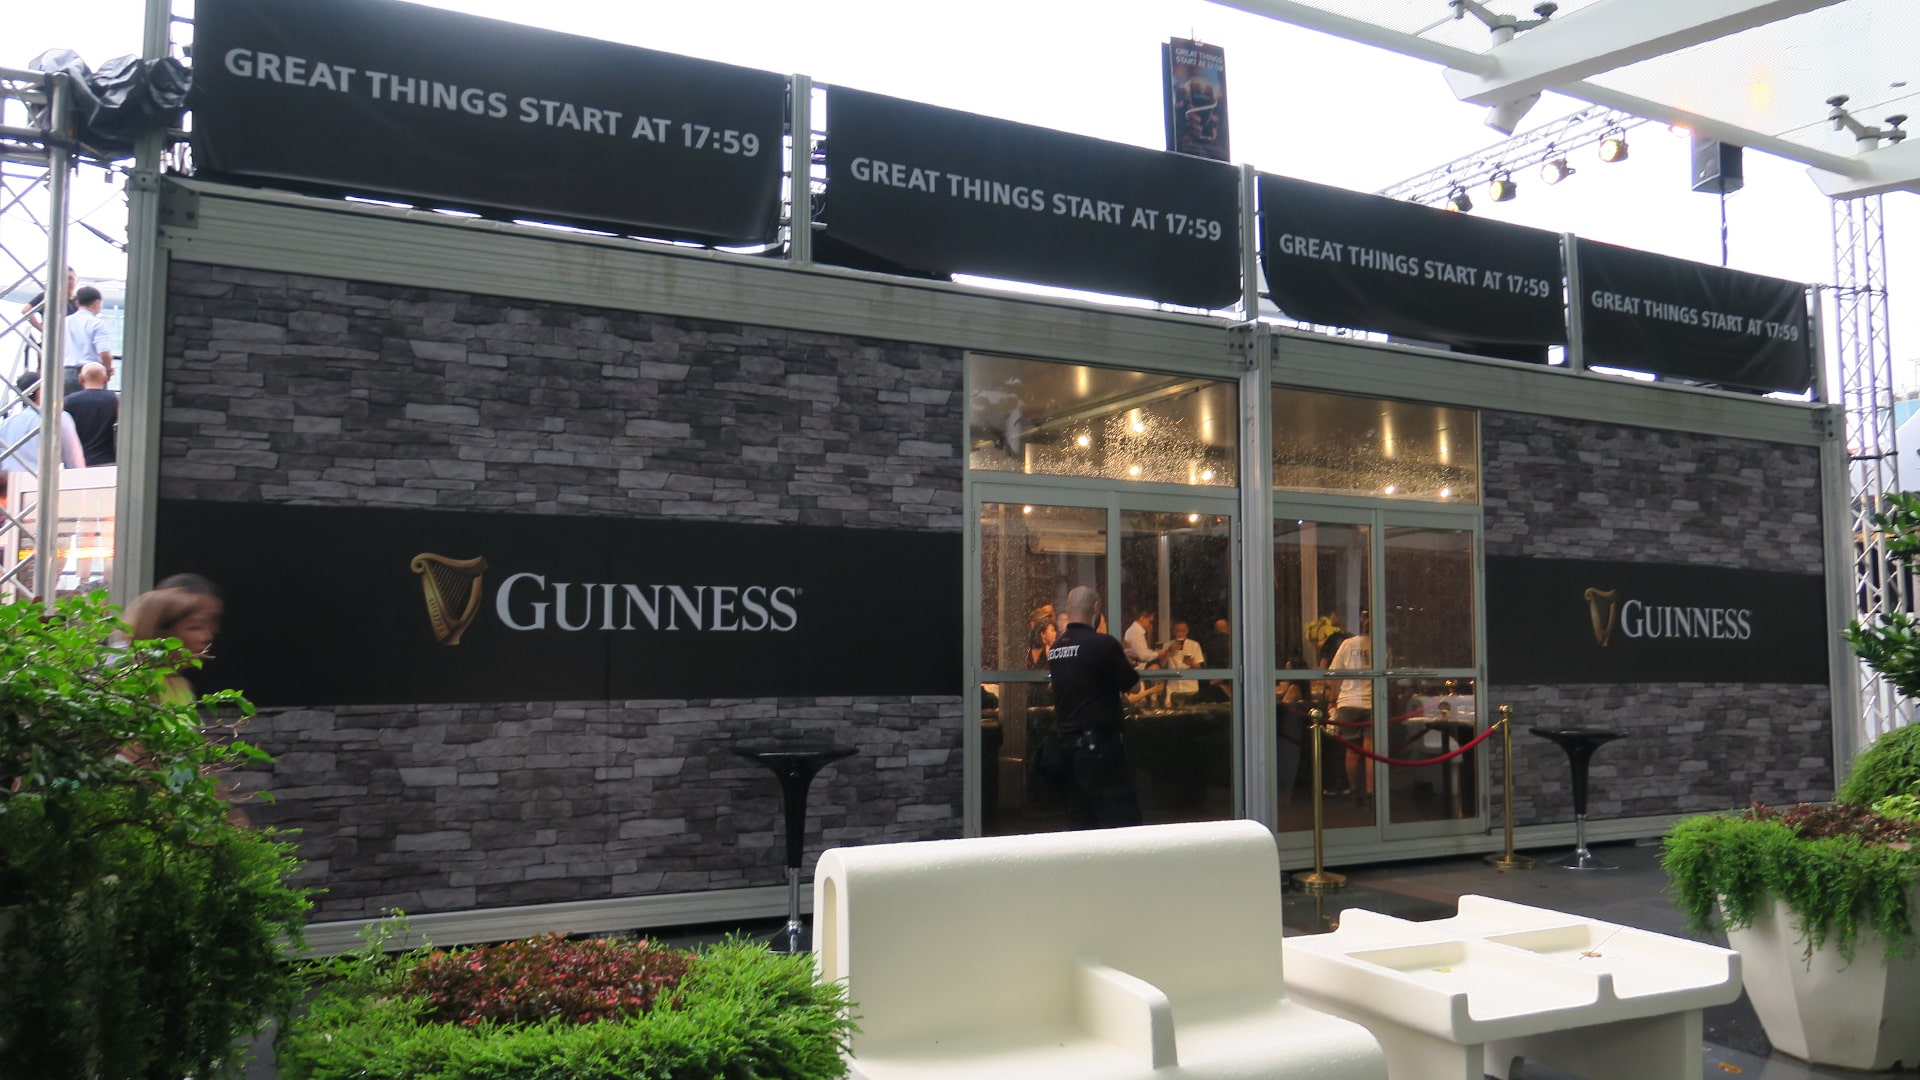 tsc_opt-images_tubelar-system_guinness-double-storey-pop-up-lounge-1920x1080-01-min